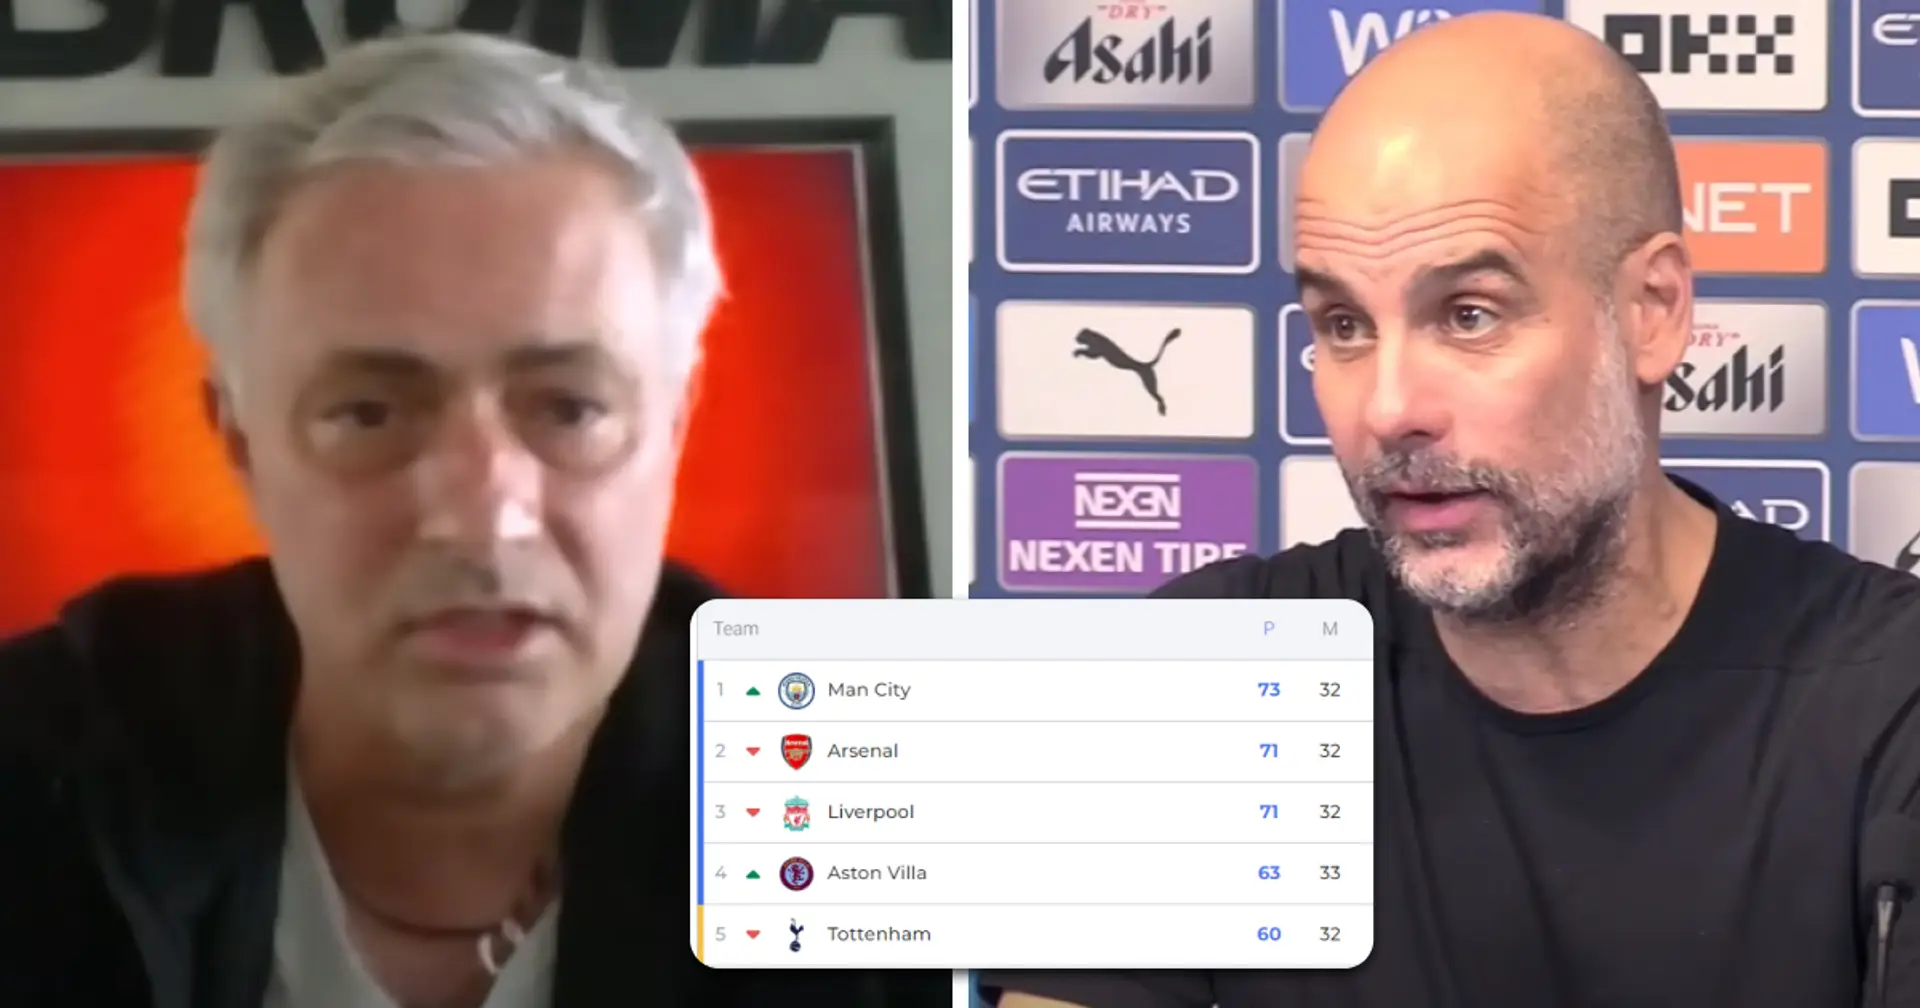 Jose Mourinho's prediction about Man City seems to be on point after Liverpool and Arsenal's defeats 